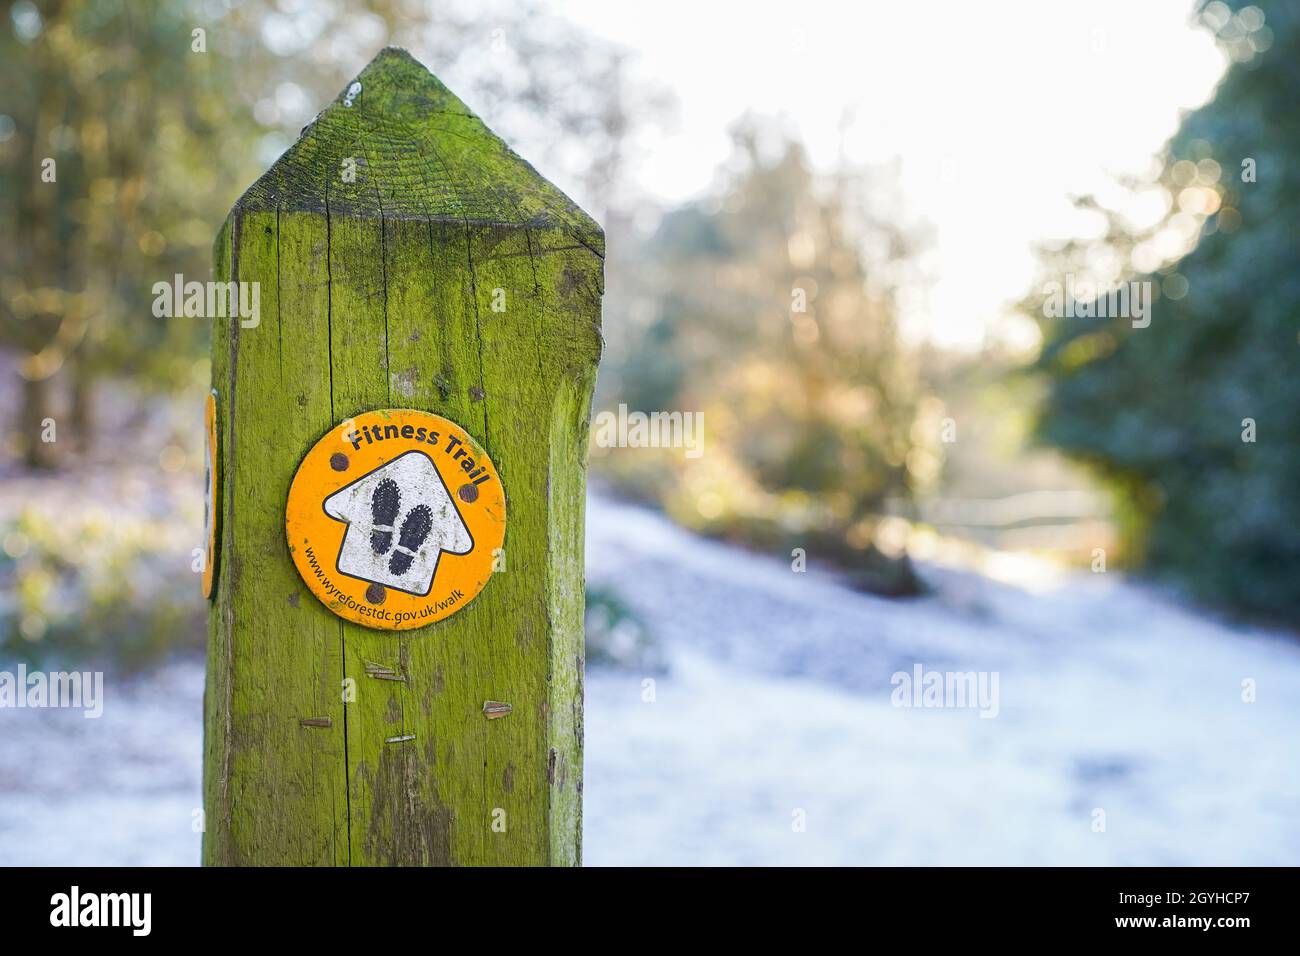 Fitness trail sign for ramblers isolated in winter countryside woodland, UK, with light snow on ground. Stock Photo